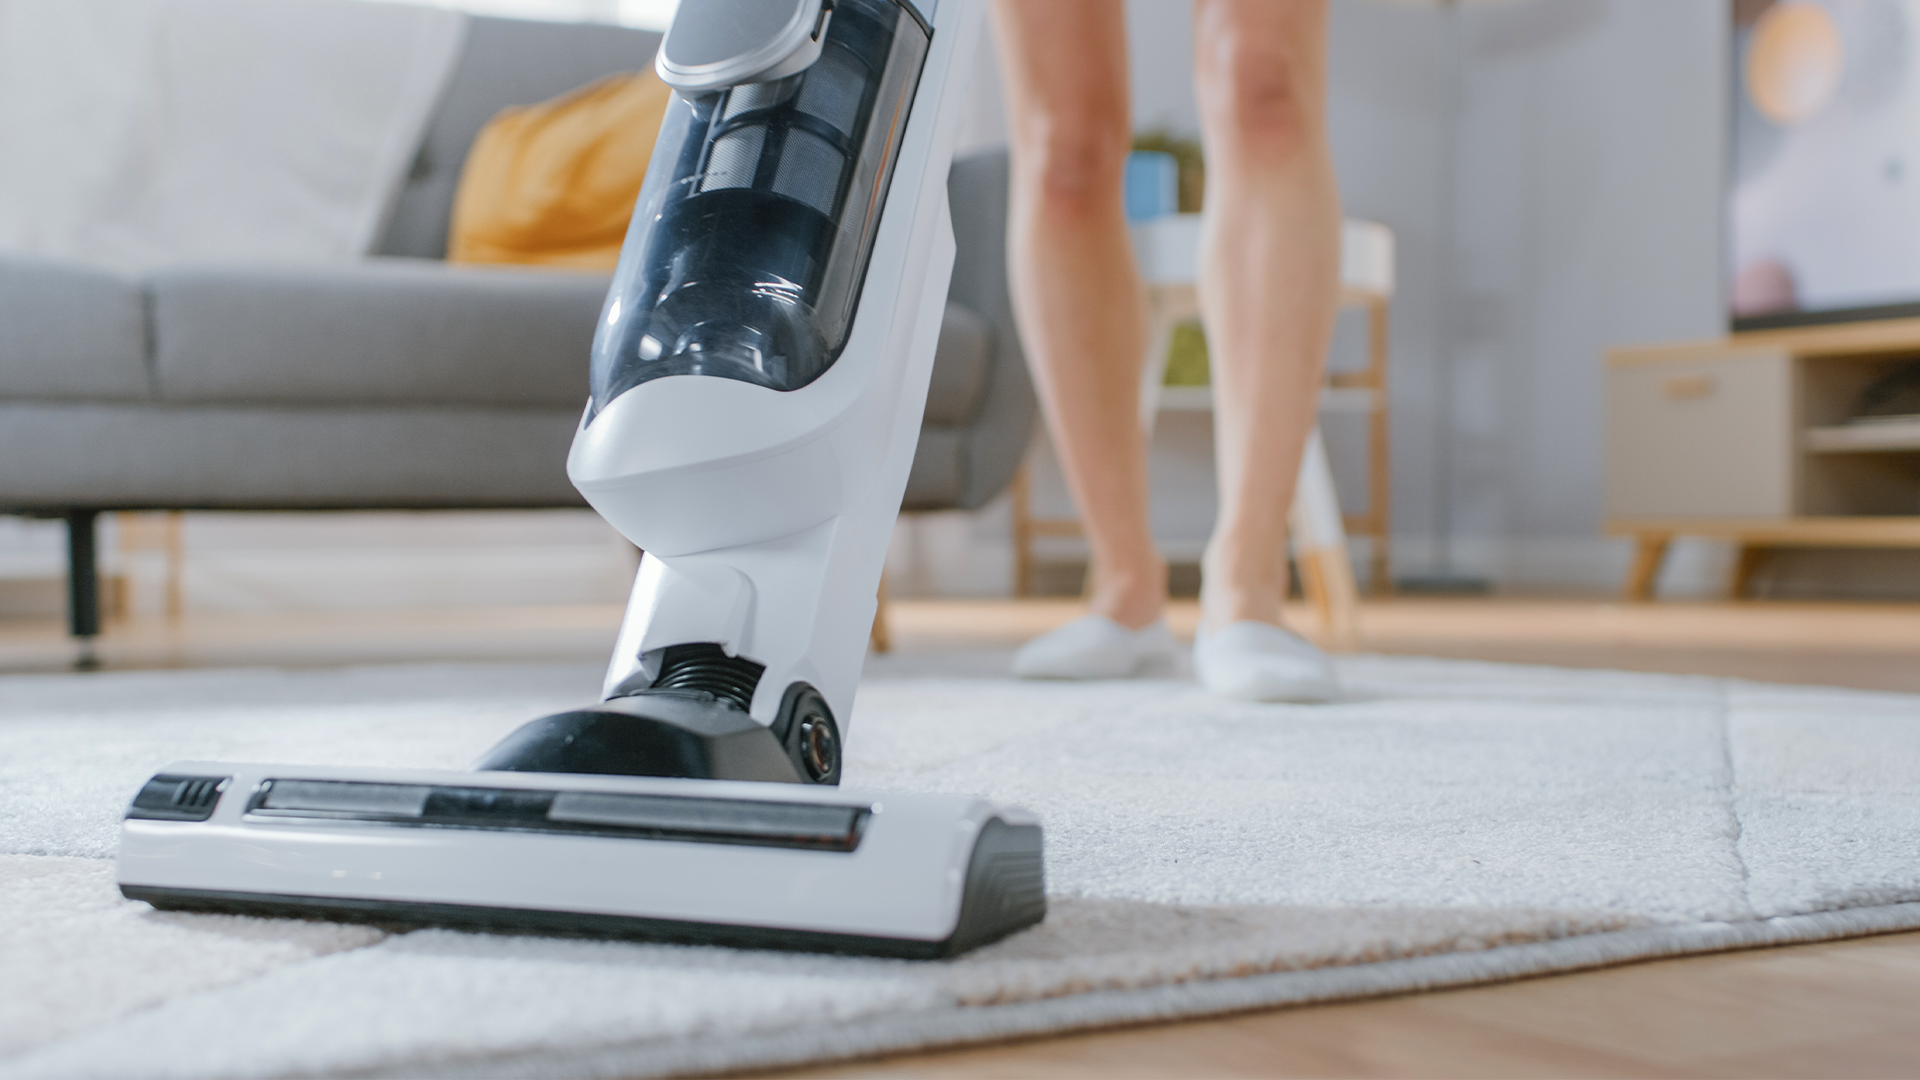 Using a cordless vacuum on a small rug.